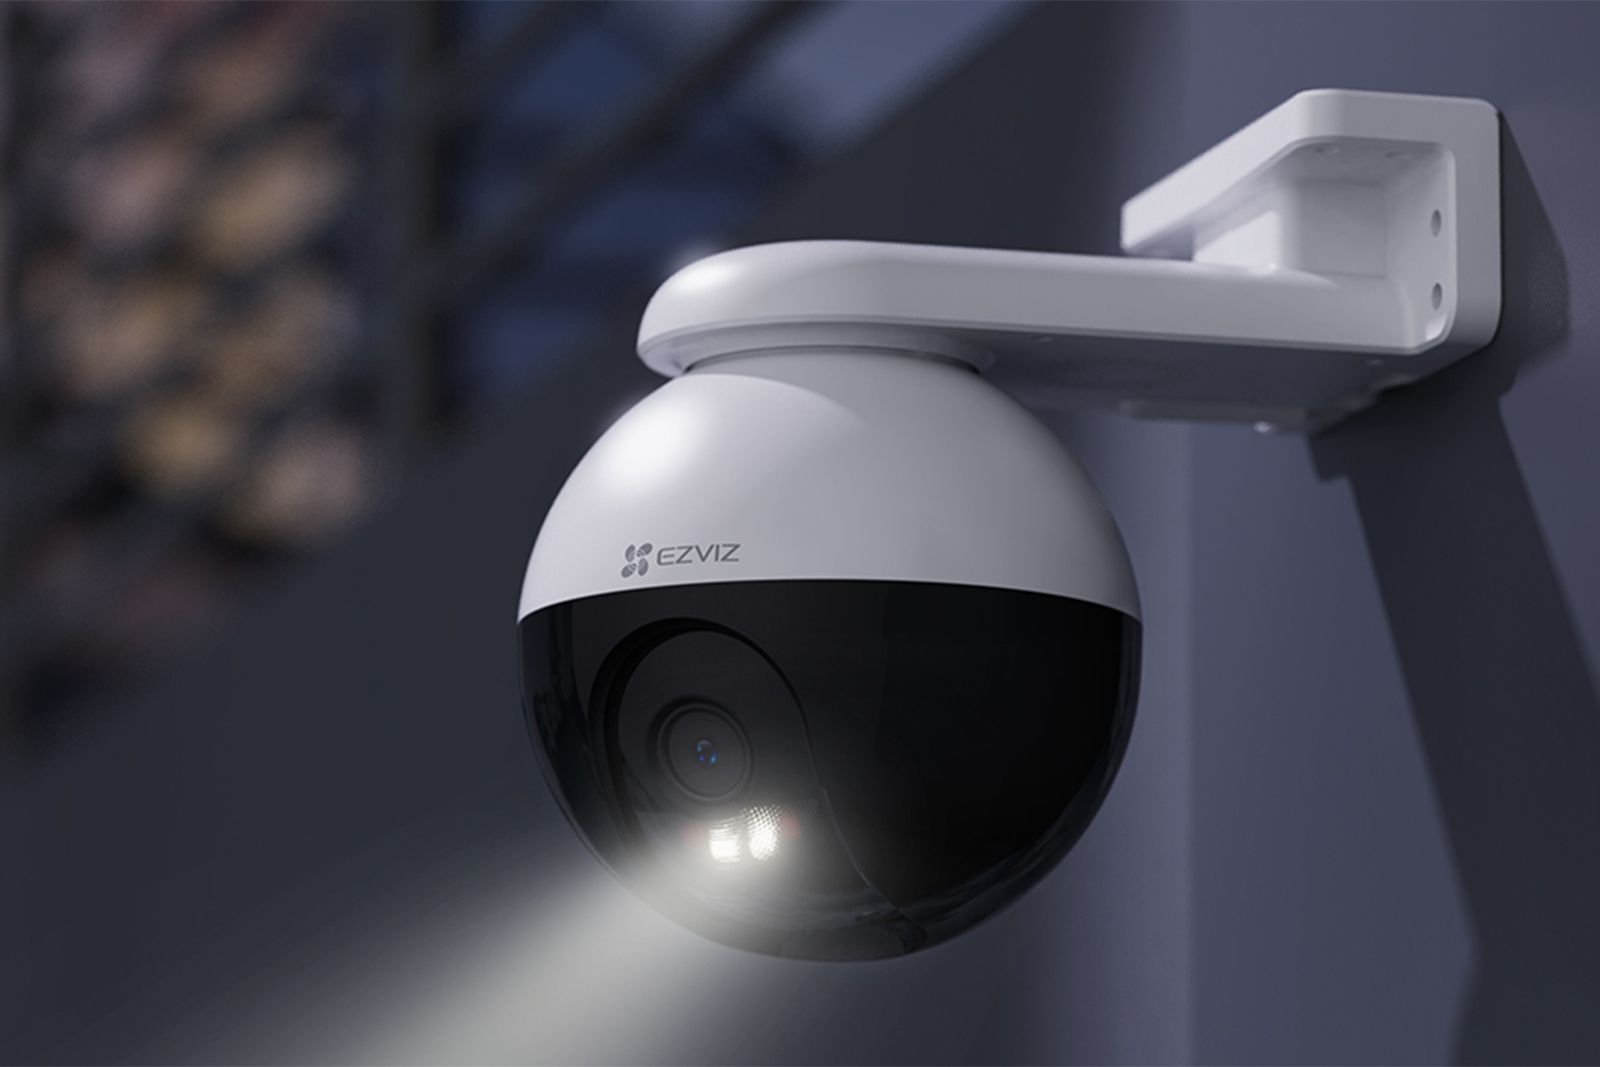 Eliminate all blind spots and monitor every inch of your home with the EZVIZ C8W Pro pan-and-tilt camera photo 1